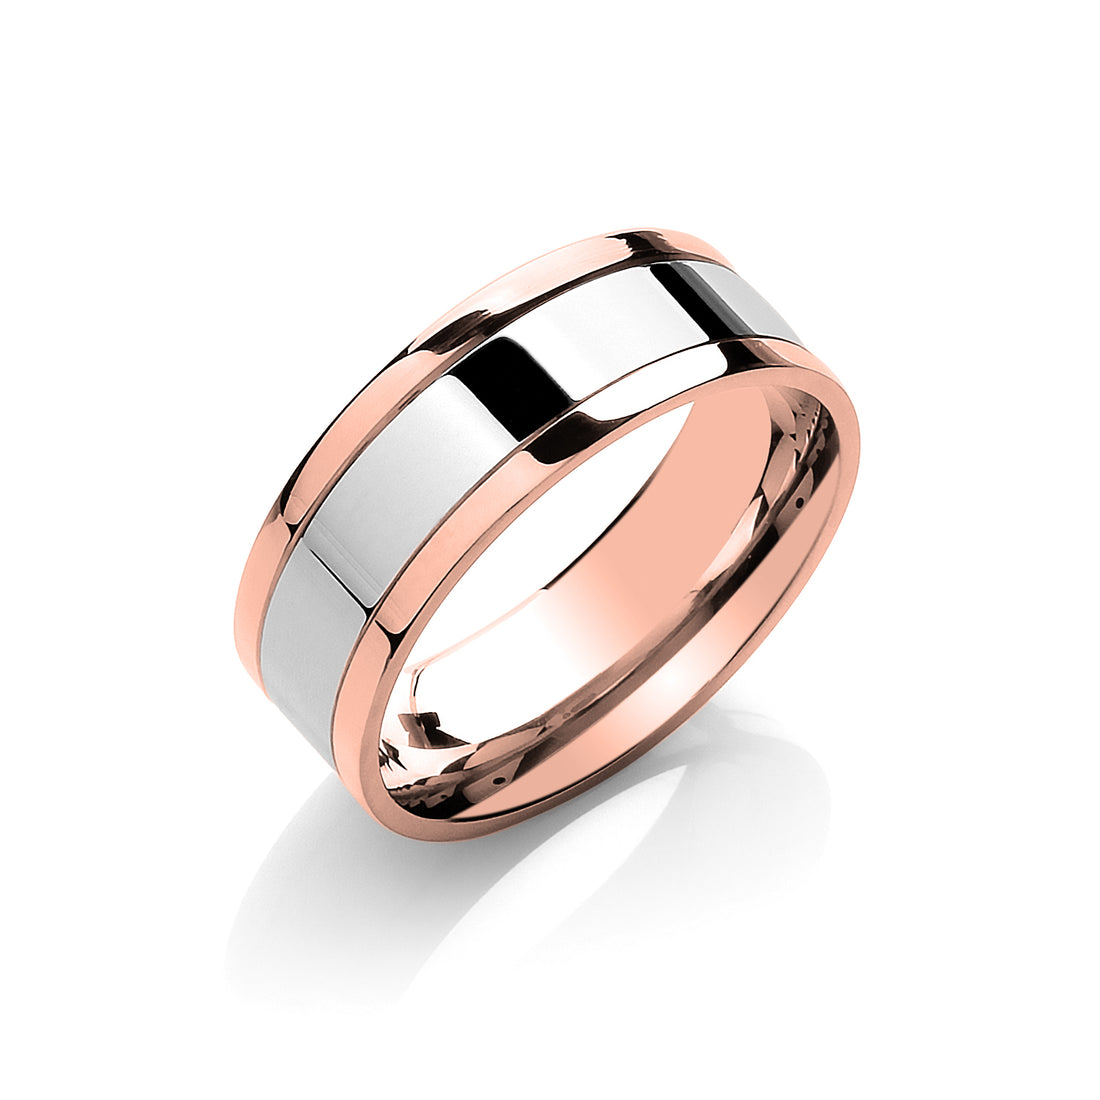 7mm 9CT Two Colour Gold Parallel Groove Wedding Band - Robert Anthony Jewellers, Edinburgh